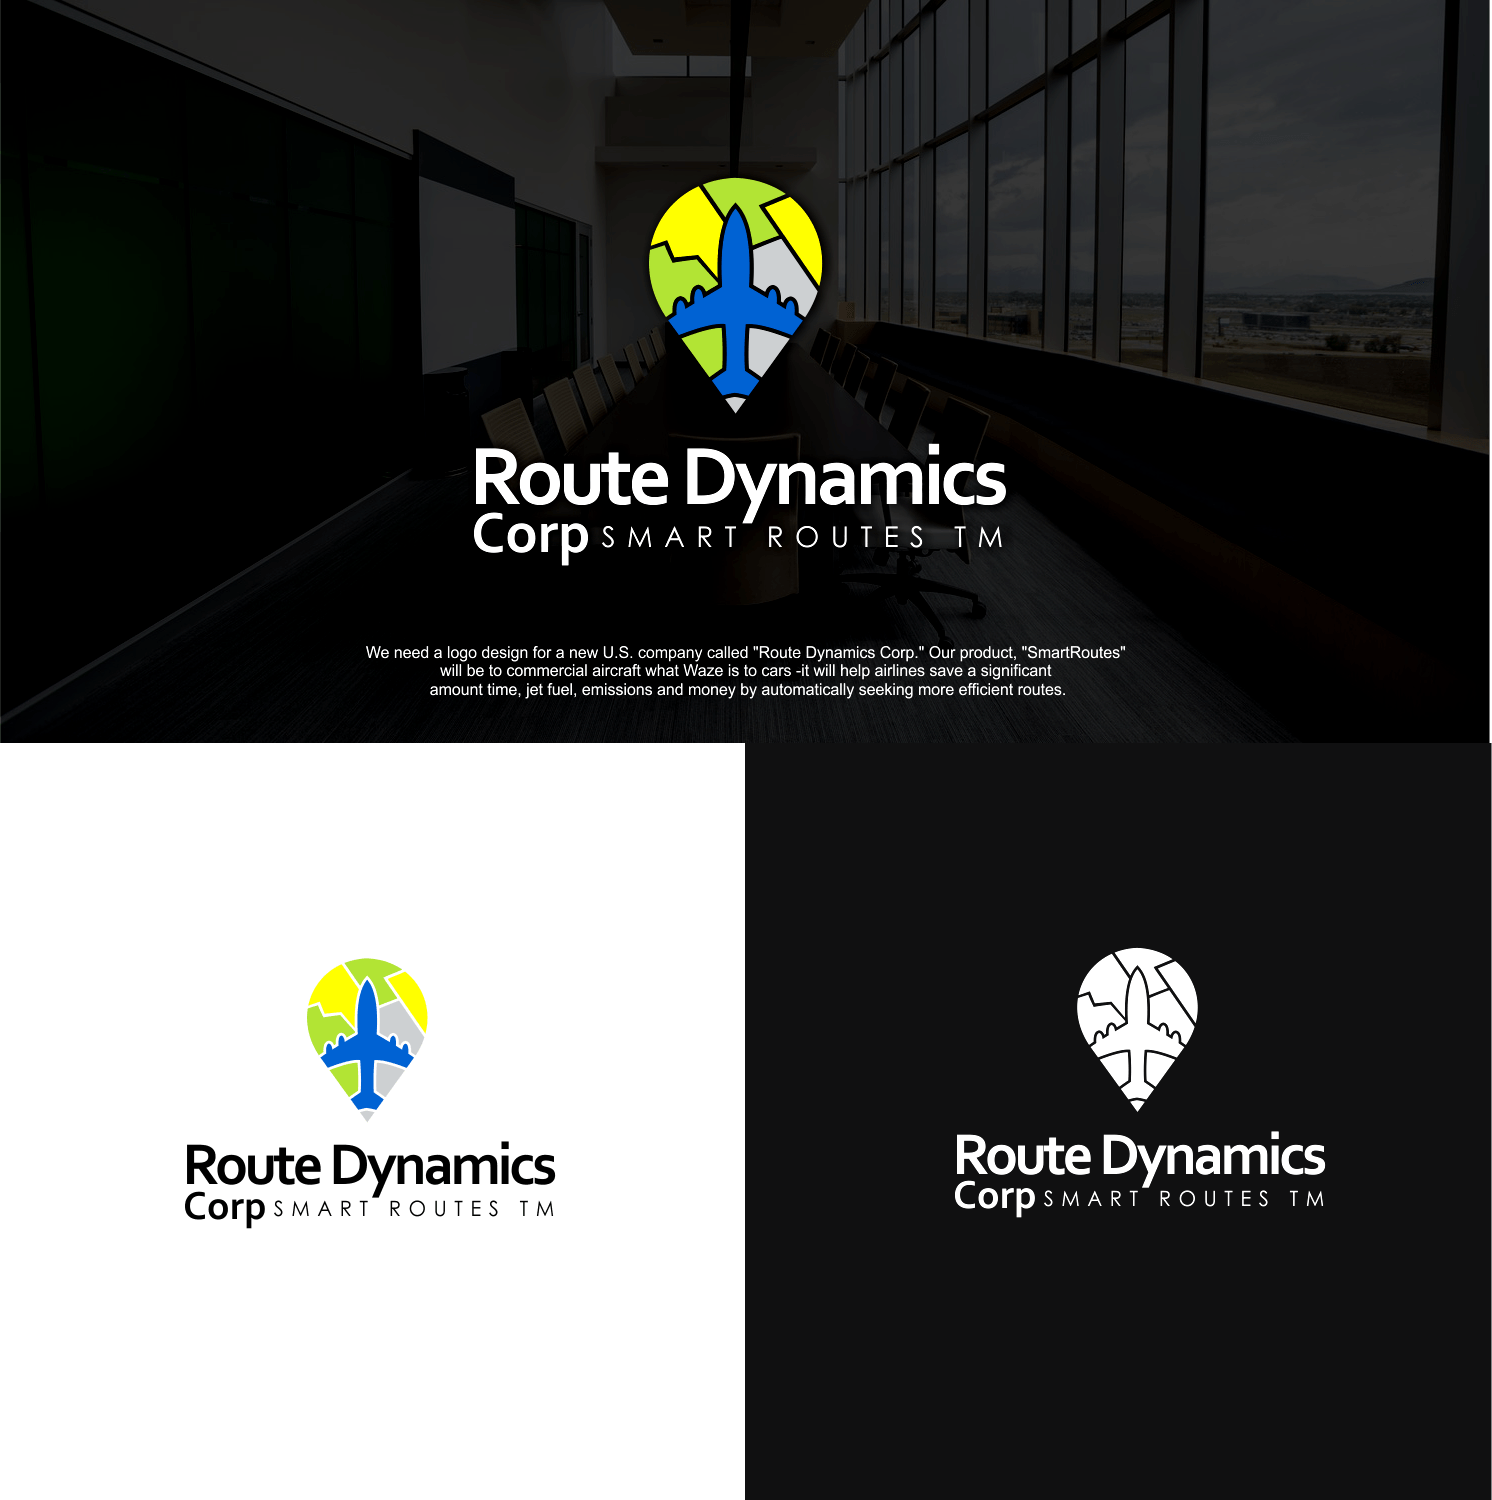 Commercial Airline Logo - Modern, Bold, Airline Logo Design for Route Dynamics Corp